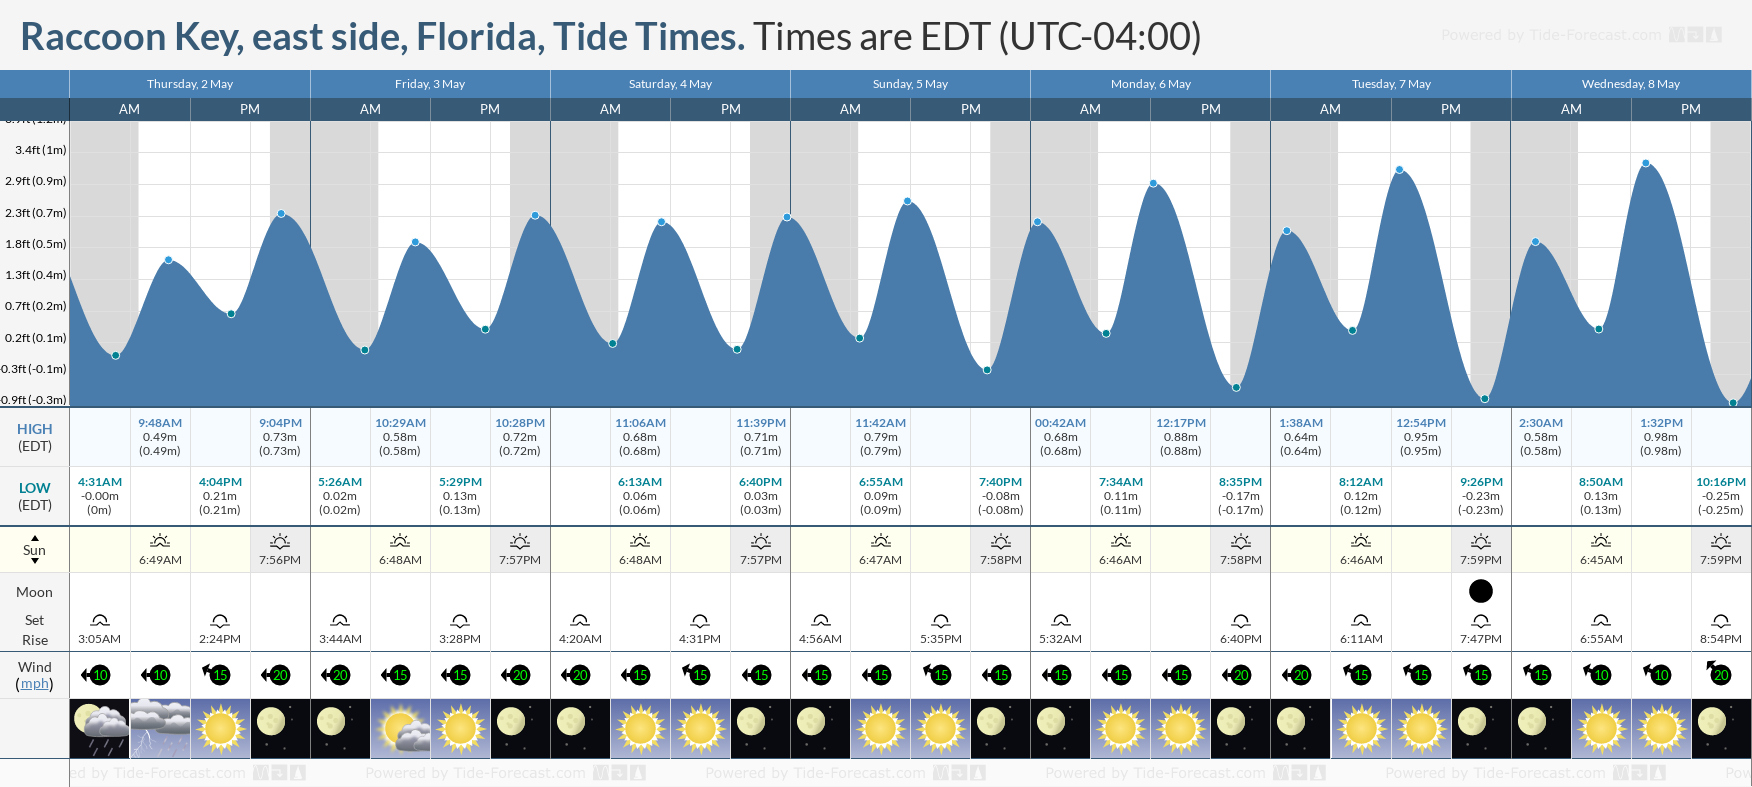 Raccoon Key, east side, Florida Tide Chart including high and low tide times for the next 7 days